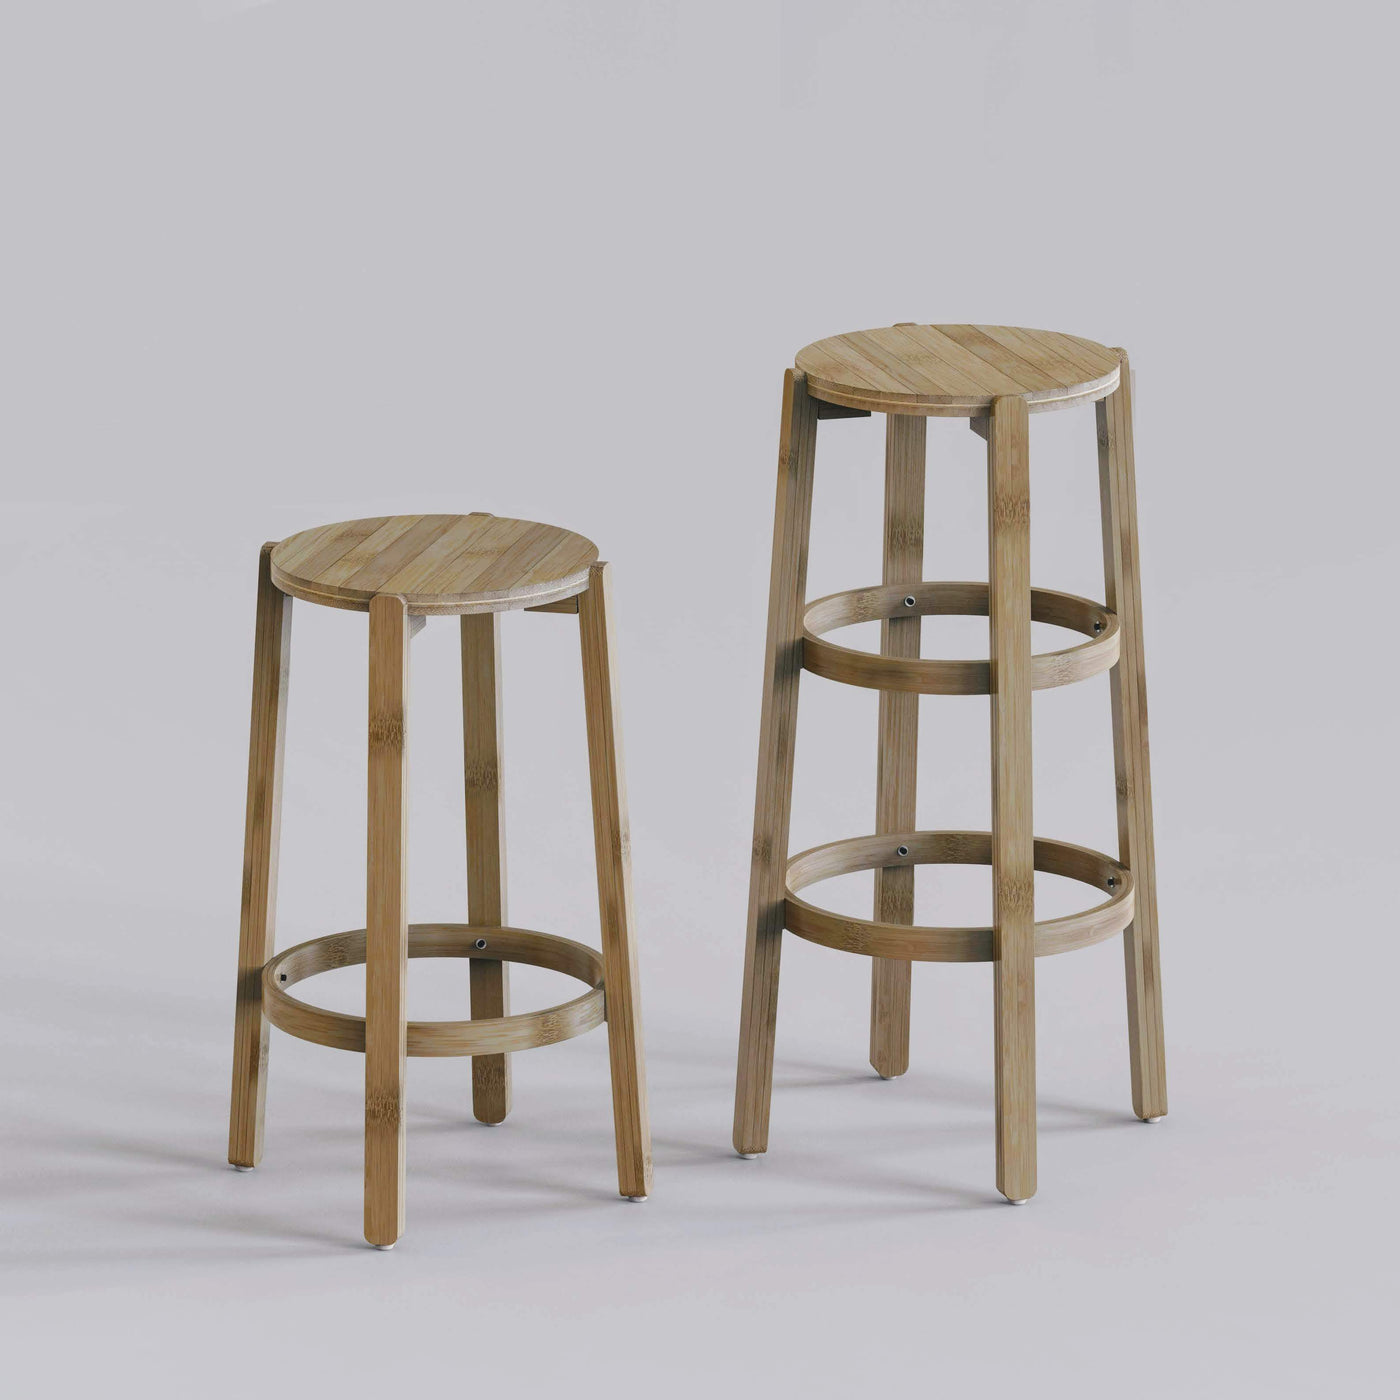 Baar Tall Bamboo Stool-Furnishings-BAMBOO, STOOLS-Forest Homes-Nature inspired decor-Nature decor